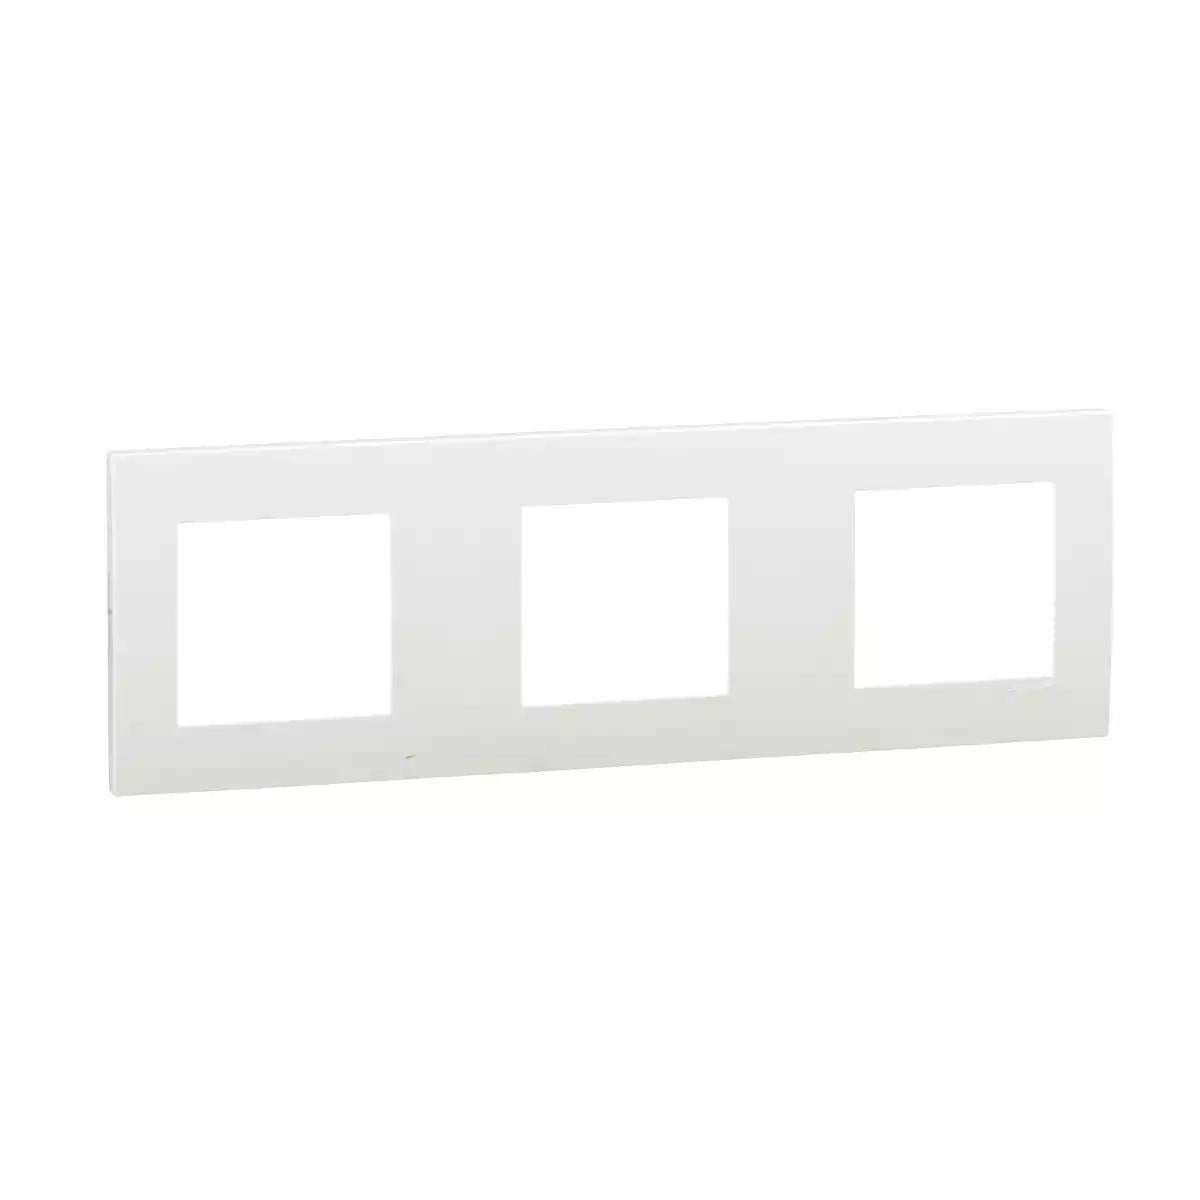 Schneider Electric Vivace Triple gang surround cover frame - 258H x 86H x 8D - White